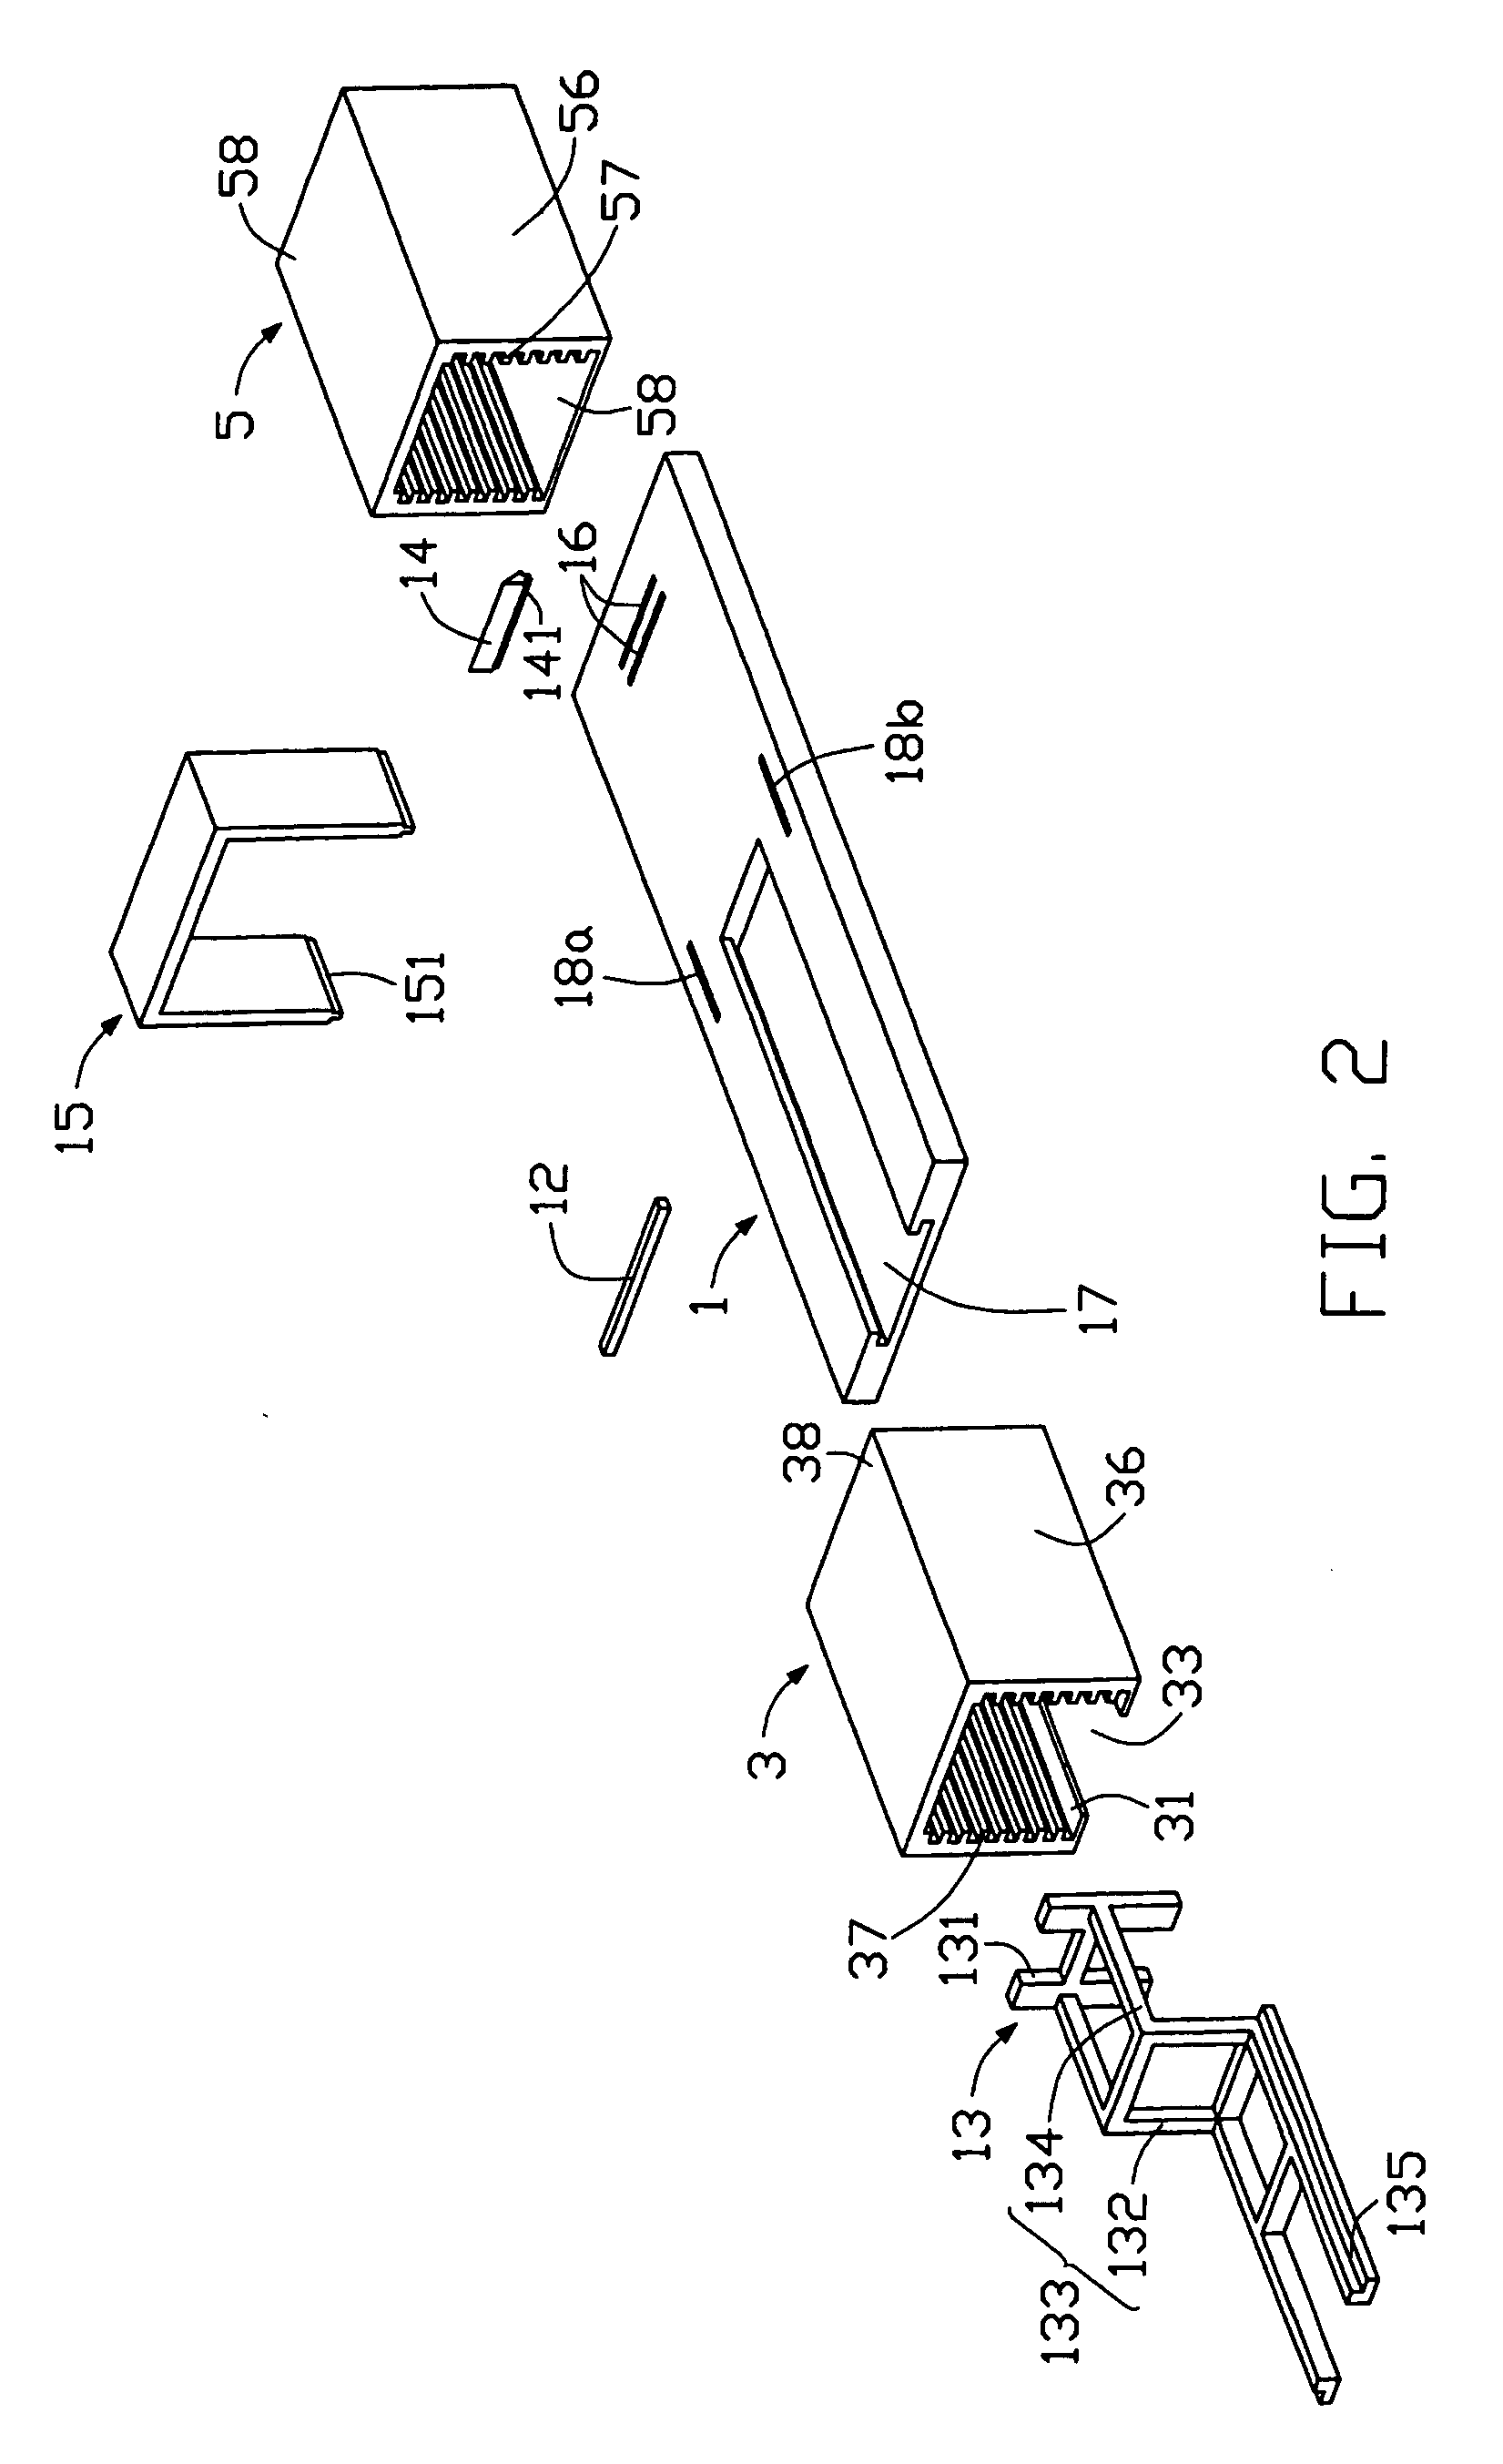 Substrate transfer device with cassettes